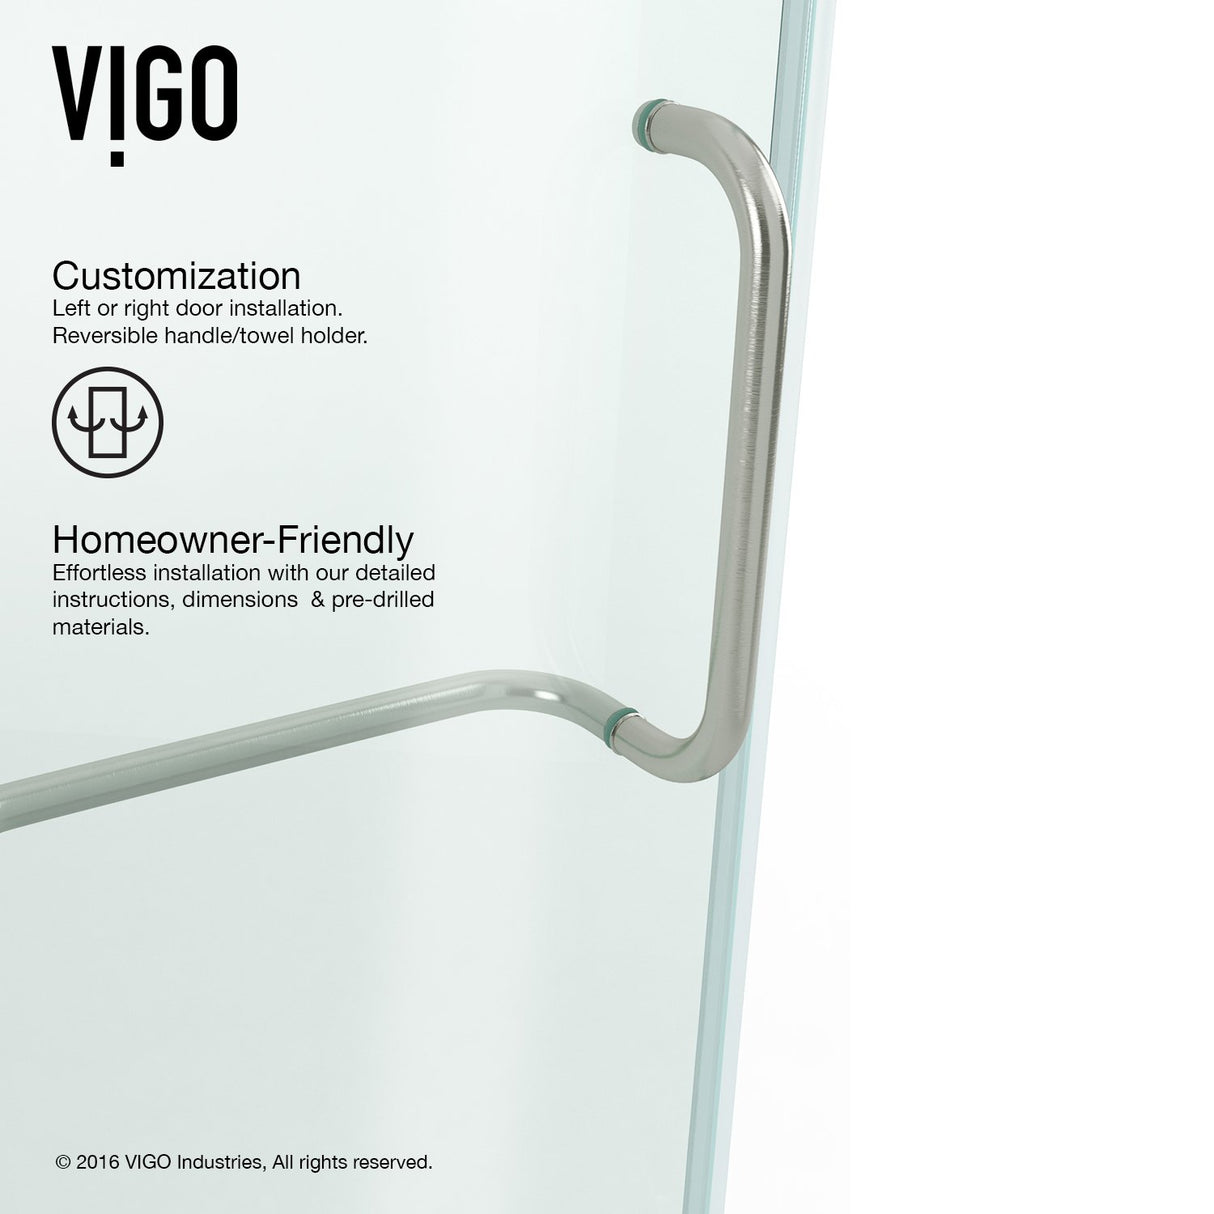 VIGO Adjustable 30 - 36 in. W x 72 in. H Frameless Pivot Rectangle Shower Door with Clear Tempered Glass and St. Steel Hardware in Brushed Nickel Finish with Reversible Handle - VG6042BNCL36